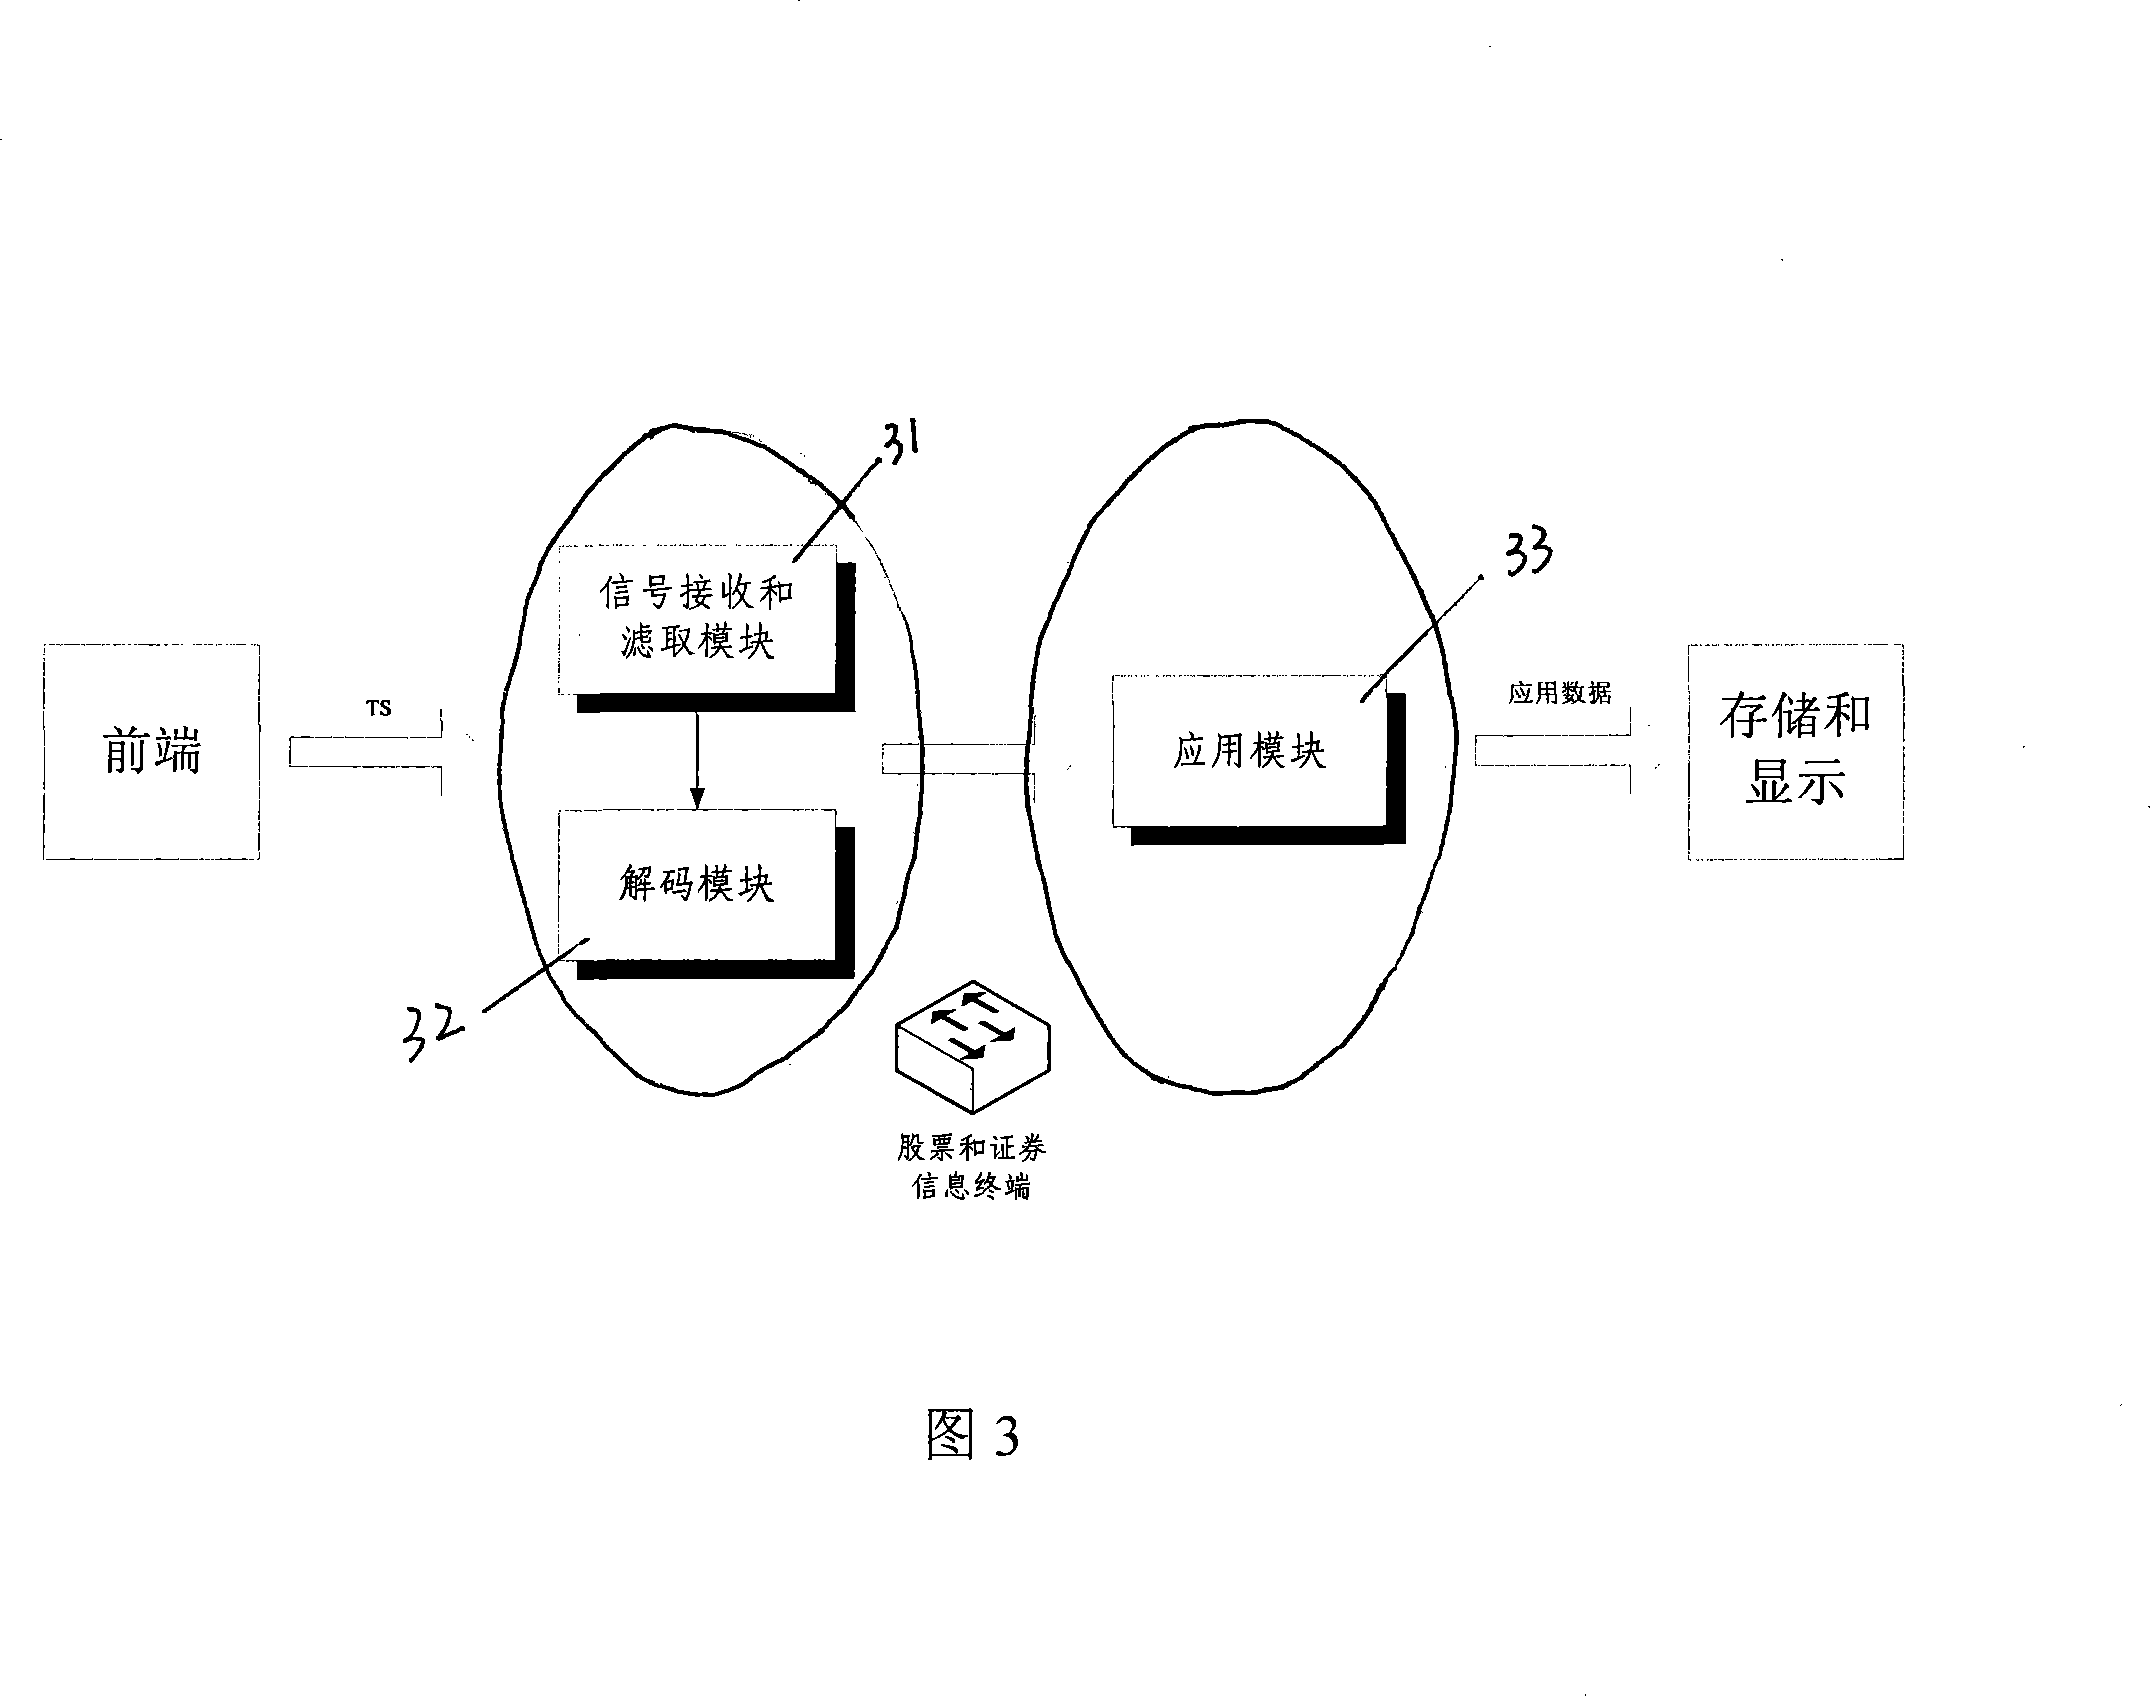 Method and system for transmitting stock information through one-way digital TV network